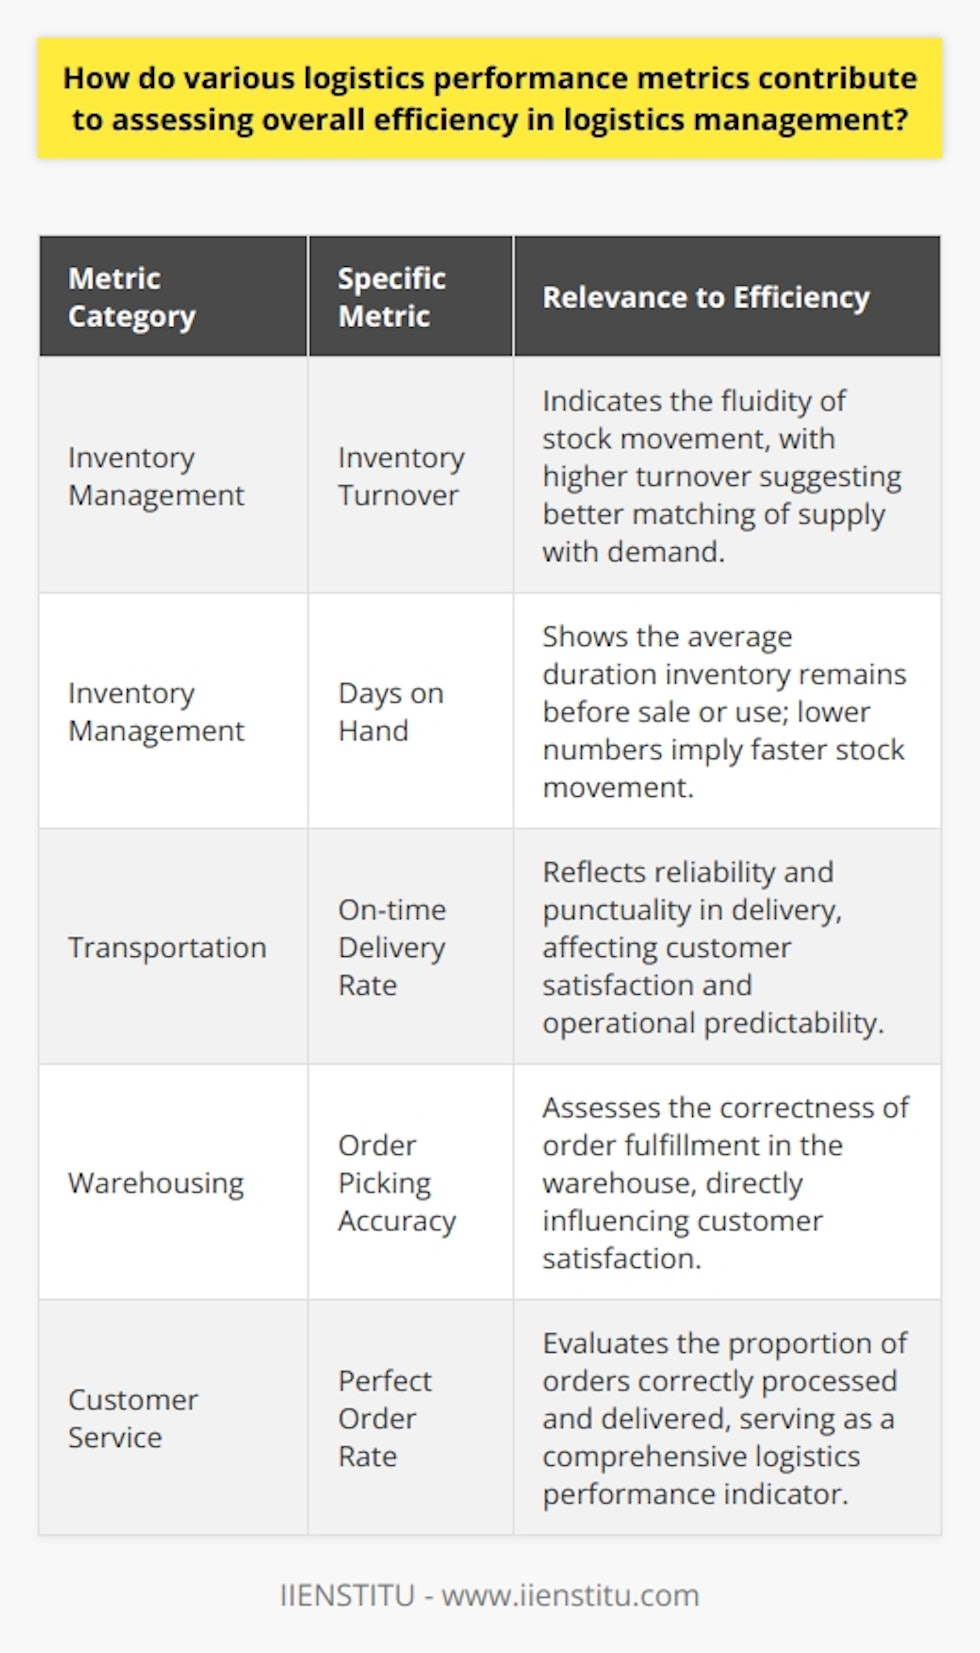 Logistics performance metrics act as the compass that guides the continuous improvement and efficiency of a supply chain. Their utility in measuring how various elements of logistics are functioning cannot be overstated, as they provide tangible data needed to make informed decisions. By utilizing metrics in categories such as inventory management, transportation, warehousing, and customer service, organisations can pinpoint how effectively they are managing their logistics operations.Inventory metrics are particularly important for striking the perfect balance between capital tied up in inventory versus the need to meet customer demand promptly. Metrics such as inventory turnover reveal how often an organization replaces inventory over a given period, essentially measuring the fluidity of stock movement. Similarly, days on hand shed light on the average time that inventory remains before being sold or used – lower numbers here generally point to higher efficiency. Moreover, stock accuracy percentages offer a reality check regarding the reliability of inventory data, hinting at issues in stock management systems or processes that can lead to mismatched stock levels and customer demand.Transportation metrics delve into the core of goods movement within the logistics network. On-time delivery rates not only affect customer satisfaction but also highlight the reliability and predictability of the logistics operations. Freight cost per unit allows businesses to assess the cost-effectiveness of their transport strategies – a necessity in optimizing the balance sheet. Transit time, conversely, illustrates the pace at which goods move from one point to another in the supply chain, which impacts inventory levels and thus, a company's agility in responding to market demand.In the domain of warehousing, the efficiency of storing, handling, and dispatching goods is paramount. Metrics such as order picking accuracy and storage utilization percentage act as indicators of operational success and can point toward inefficiencies in space usage or errors in picking that could tarnish customer satisfaction if left unaddressed. Order cycle time, which measures the duration between order receipt and shipment, directly affects how quickly customers receive their products and, therefore, is critical to customer service levels.Customer service logistics metrics bring everything into the perspective of the end user, which is where the true measure of logistics efficiency is experienced. Metrics such as order fill rate, indicating how many orders are shipped on the first attempt, and perfect order rate, that factors in every step in fulfilling an order correctly, are direct measures of the effectiveness of the logistics process. A low backorder rate is vital, as backorders can lead to dissatisfied customers and potential sales losses.Efficient logistics is not achieved overnight but through the vigilant application and analysis of these performance metrics. Each facet, from inventory to customer service, adds a layer of insight that, when leveraged properly, informs strategy and drives continuous improvement. It is the meticulous examination and the proactive management of logistics performance metrics that empower organizations to heighten their overall efficiency and maintain a solid competitive stance in the dynamic arena of supply chain management.